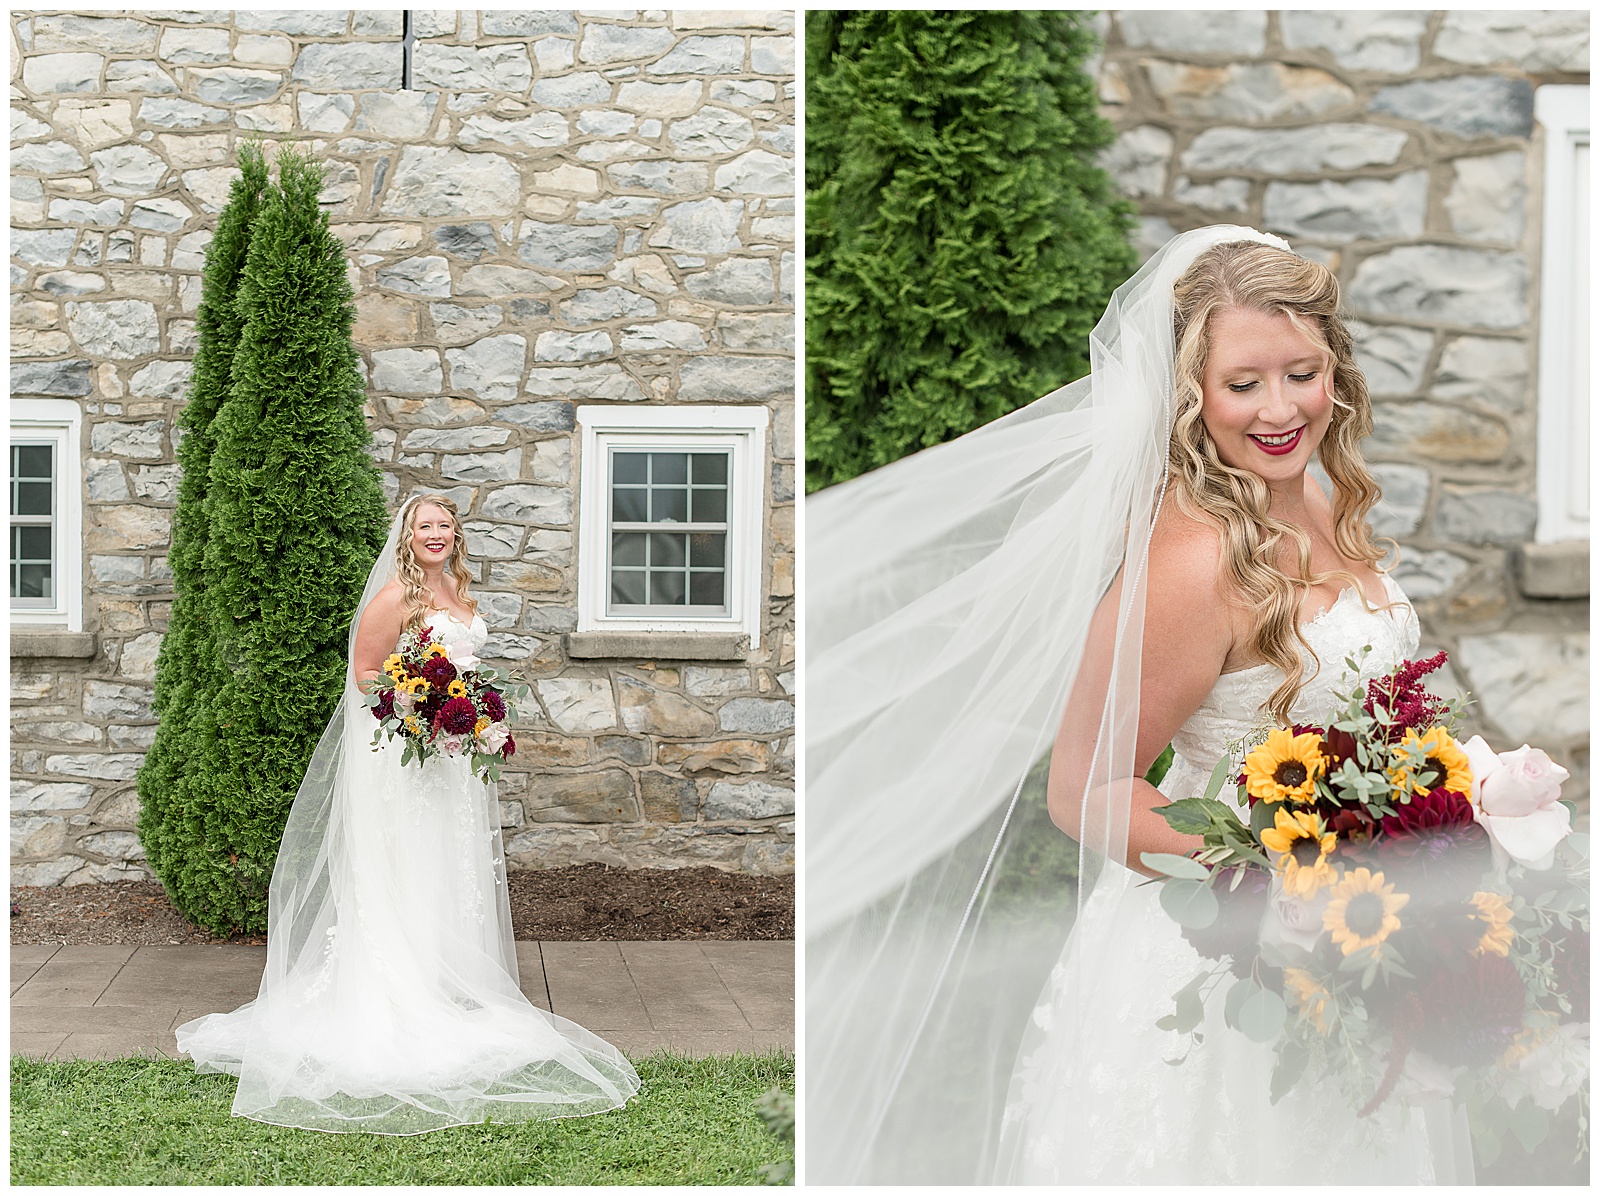 bride holding fall bouquet with sunflowers in it by stone wall as her long veil blows behind her